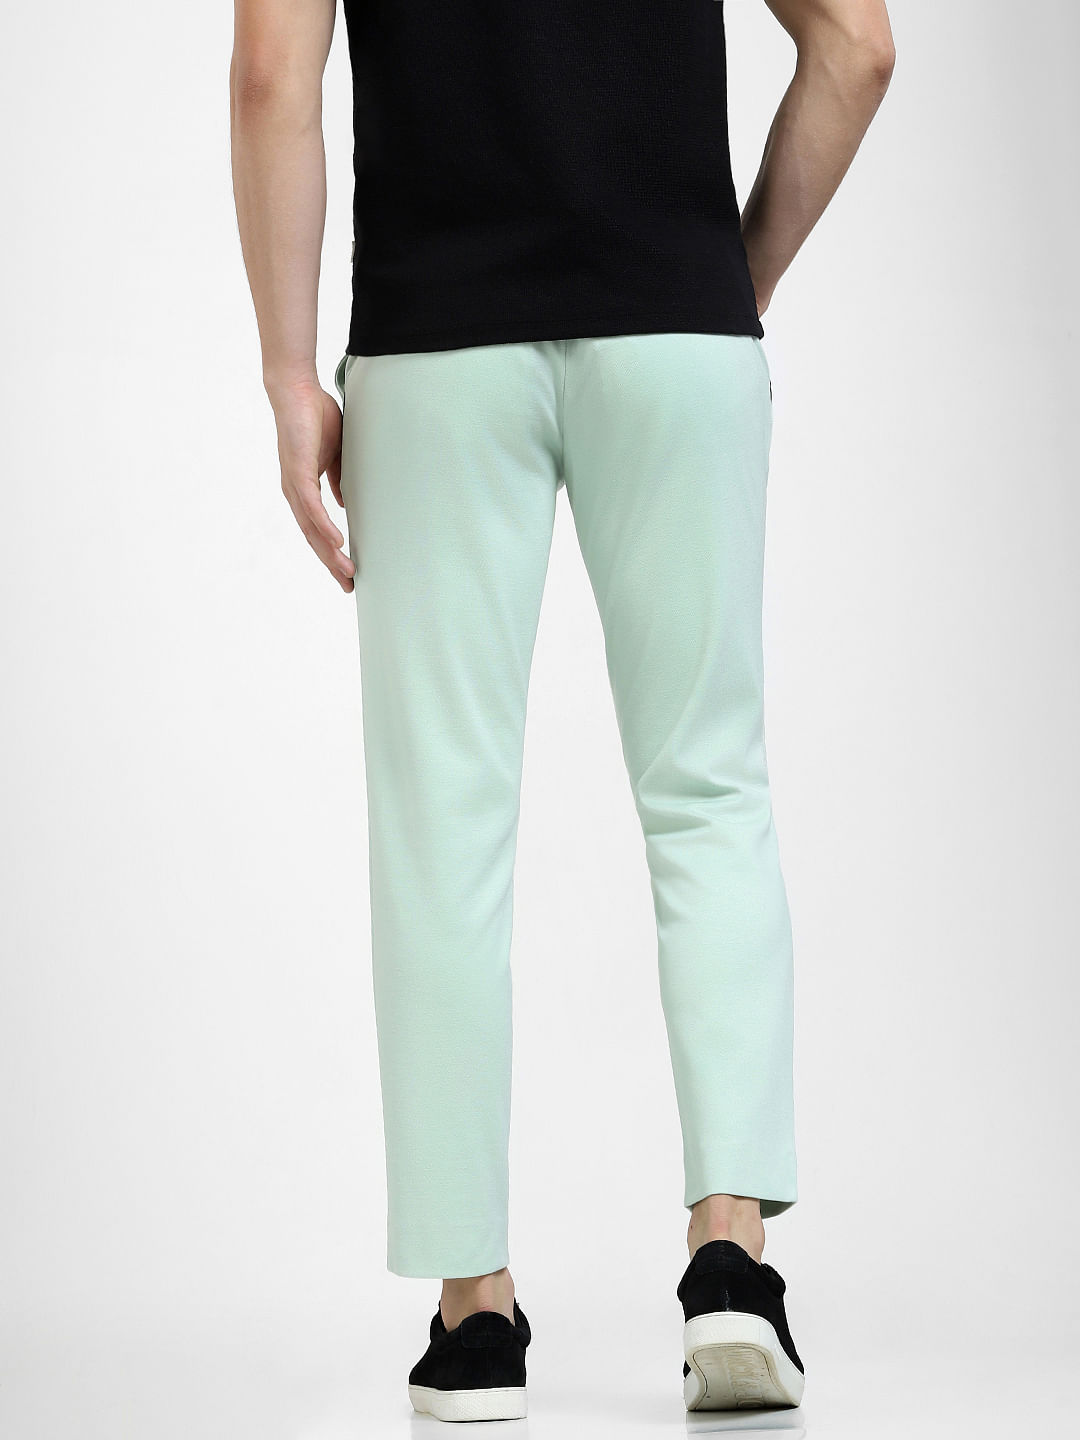 Which shirt goes with light green pants  Quora